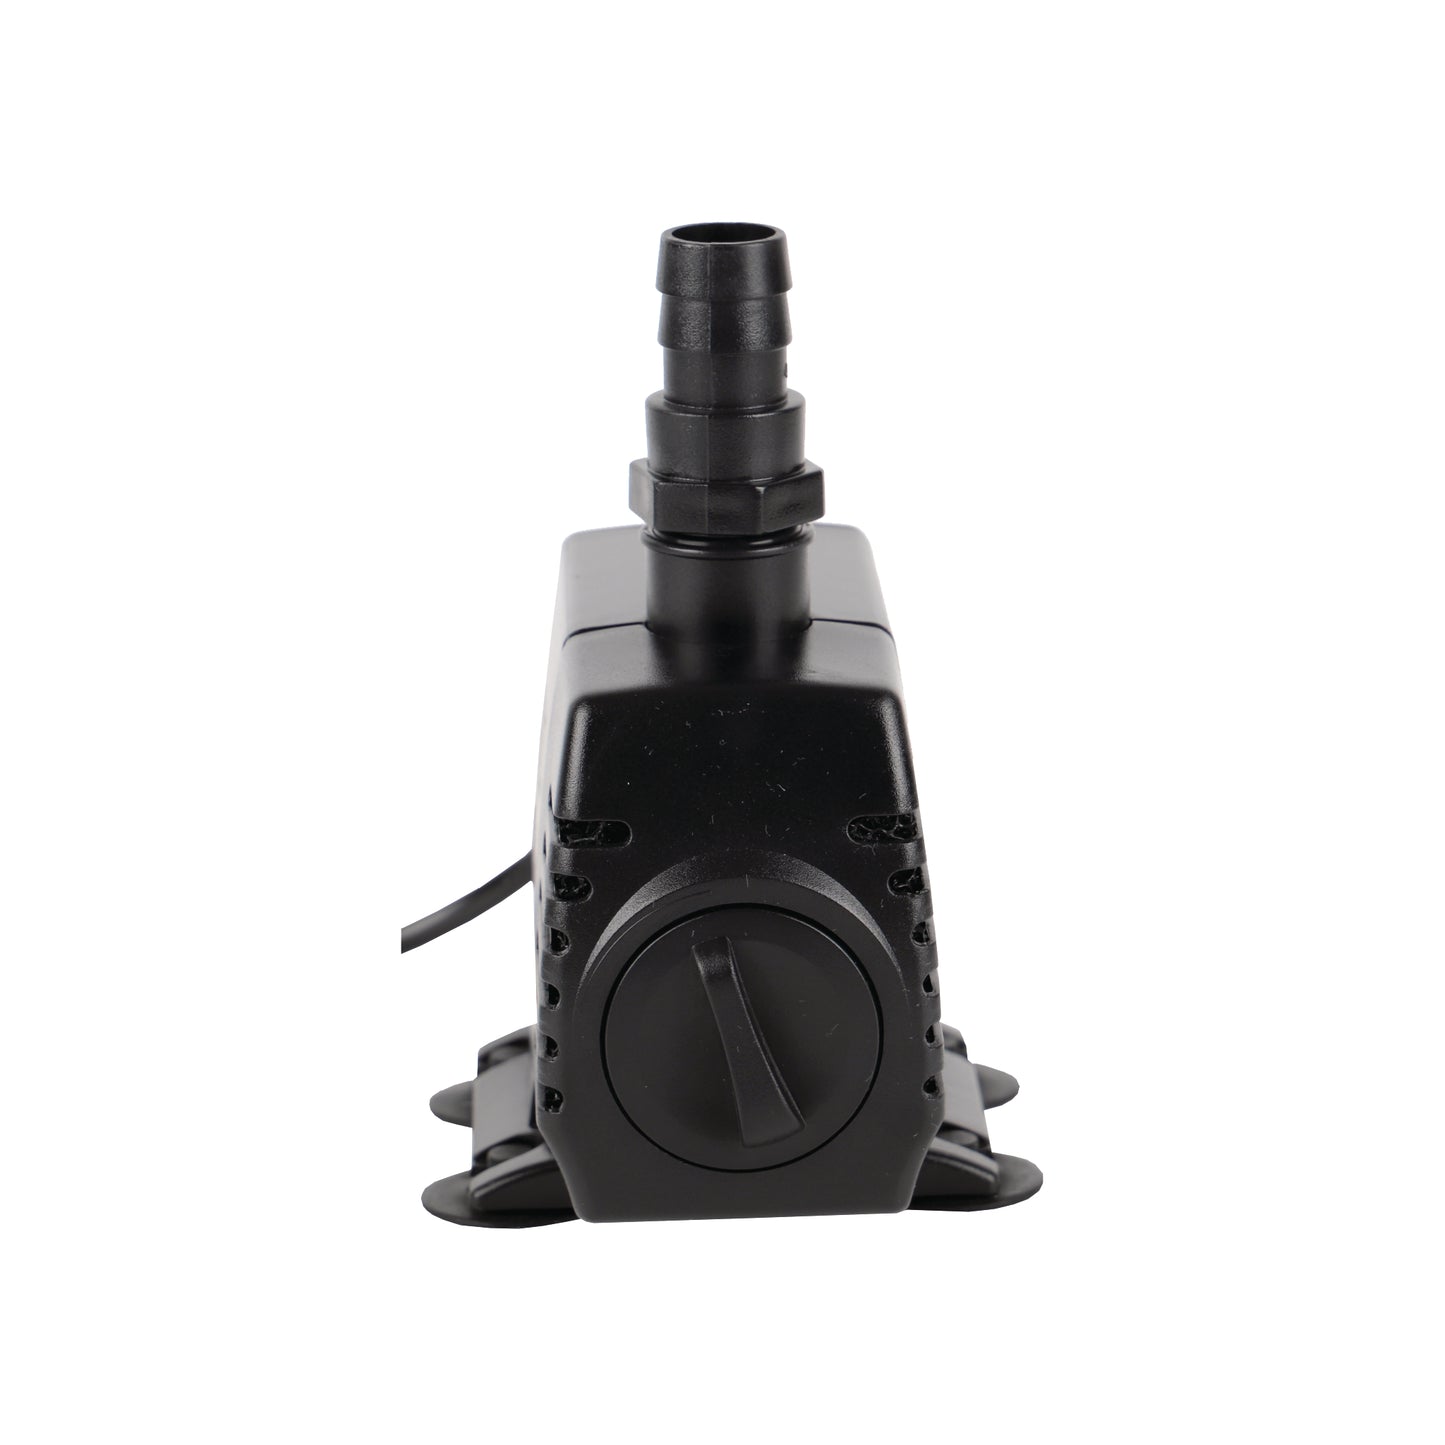 Waterfall Pumps - Pond or Fountain Submersible - Water Pump - 1500L/h - 3m